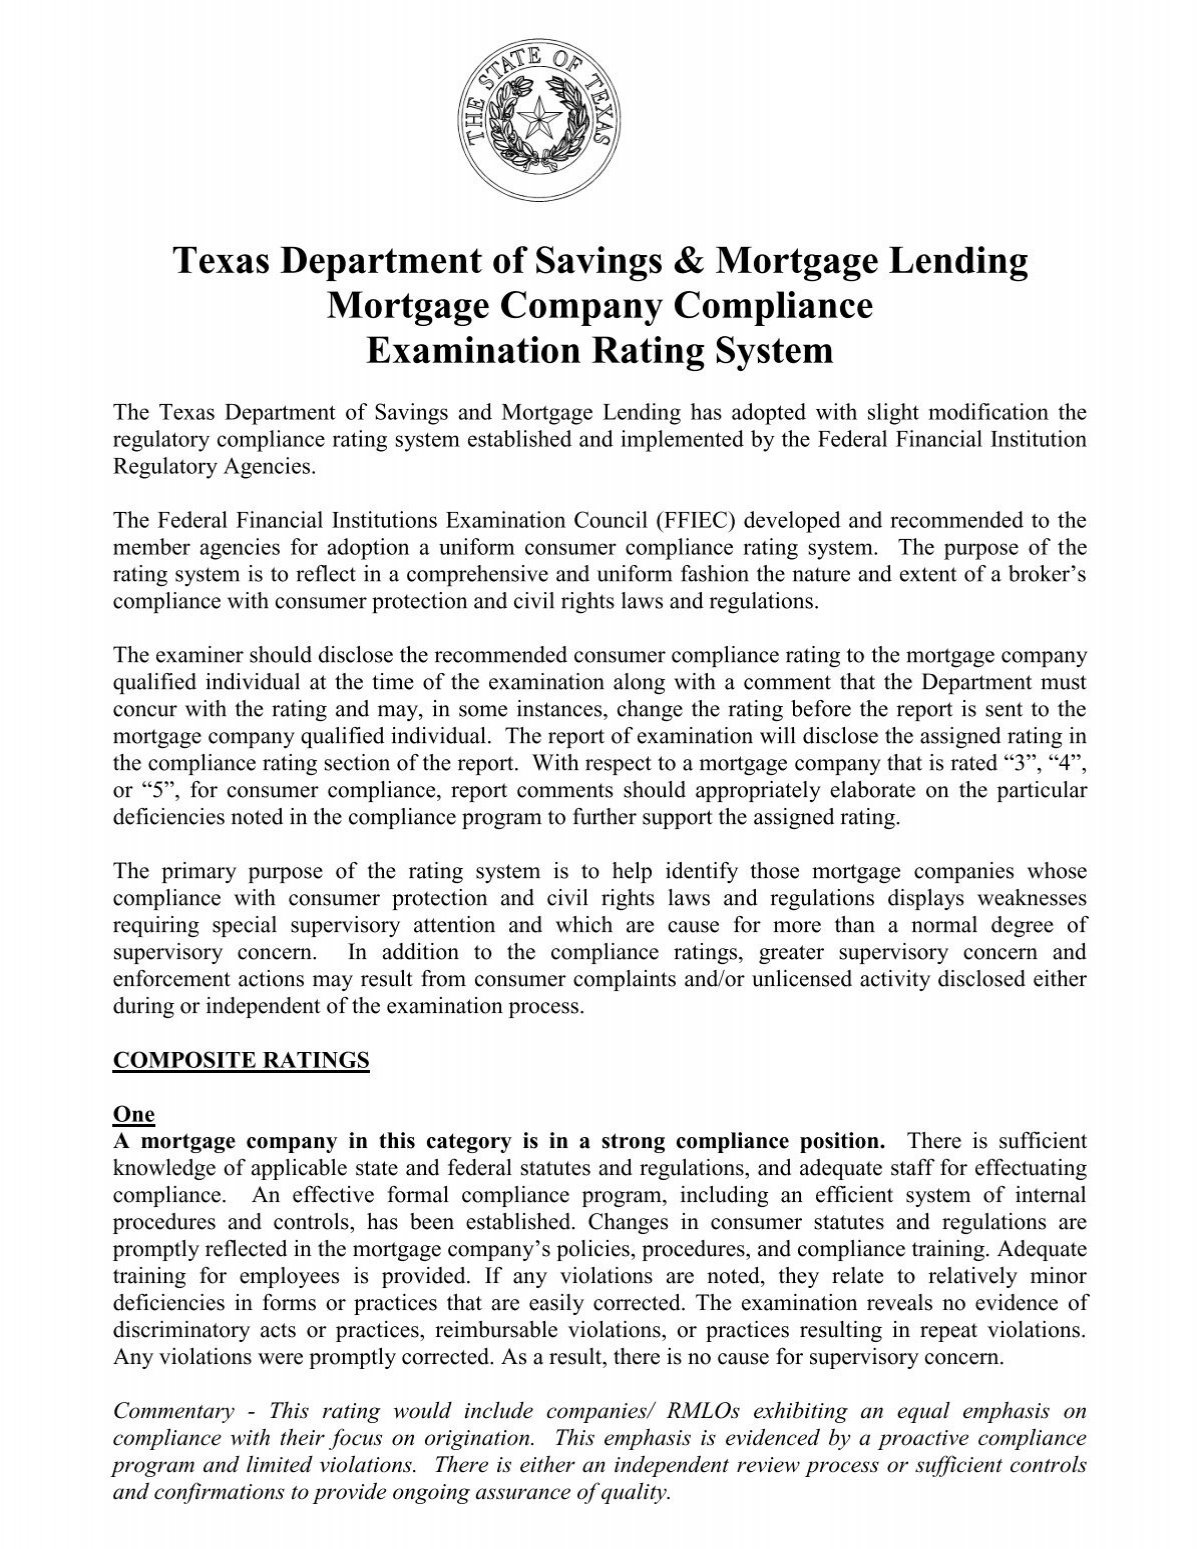 Mortgage Company Examination Rating System - Texas Department ...